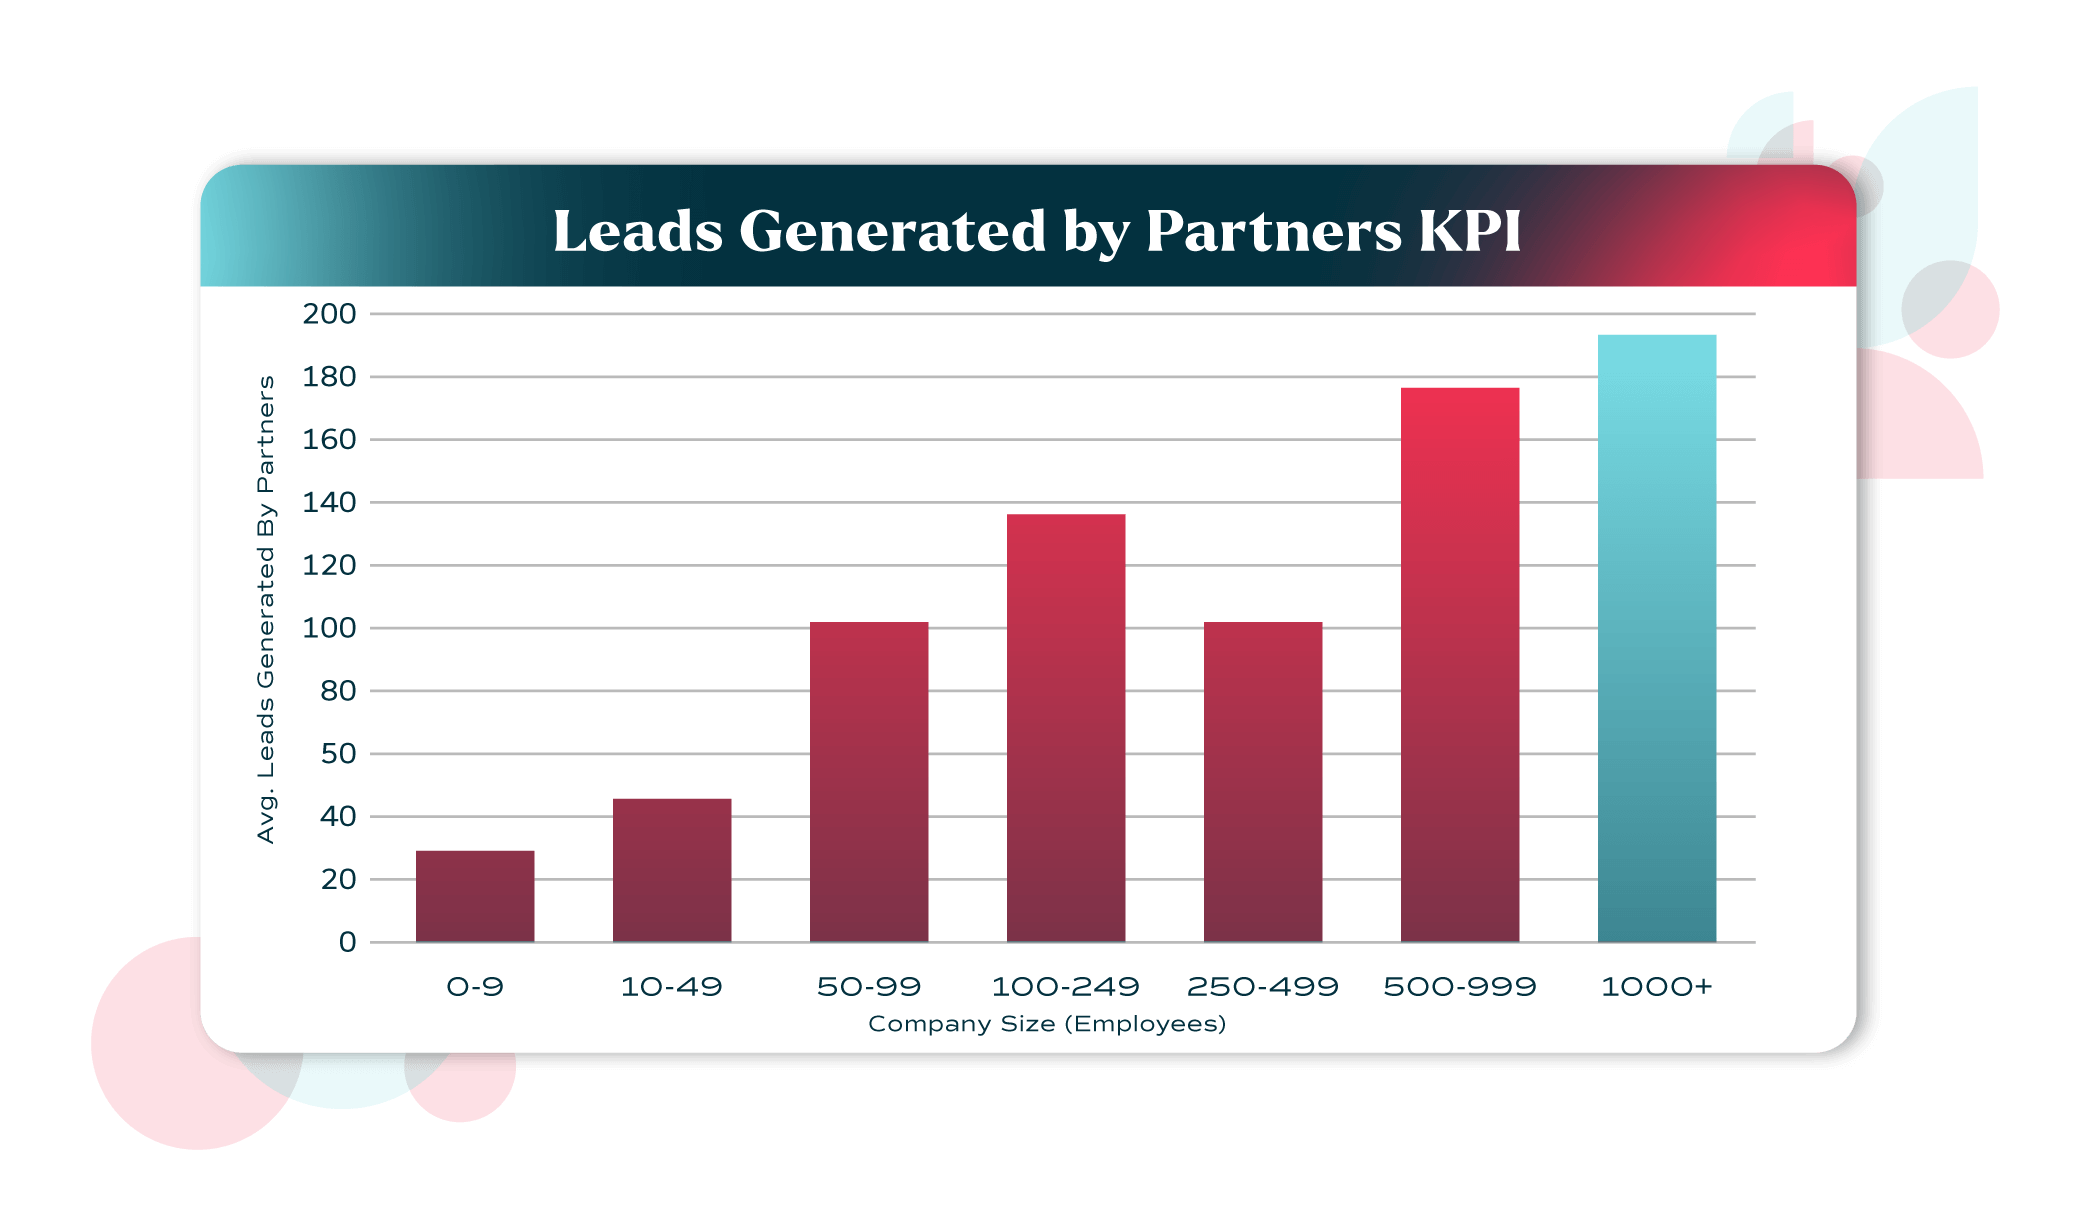 leads-generated-by-partners-kpi-company-size-crossbeam